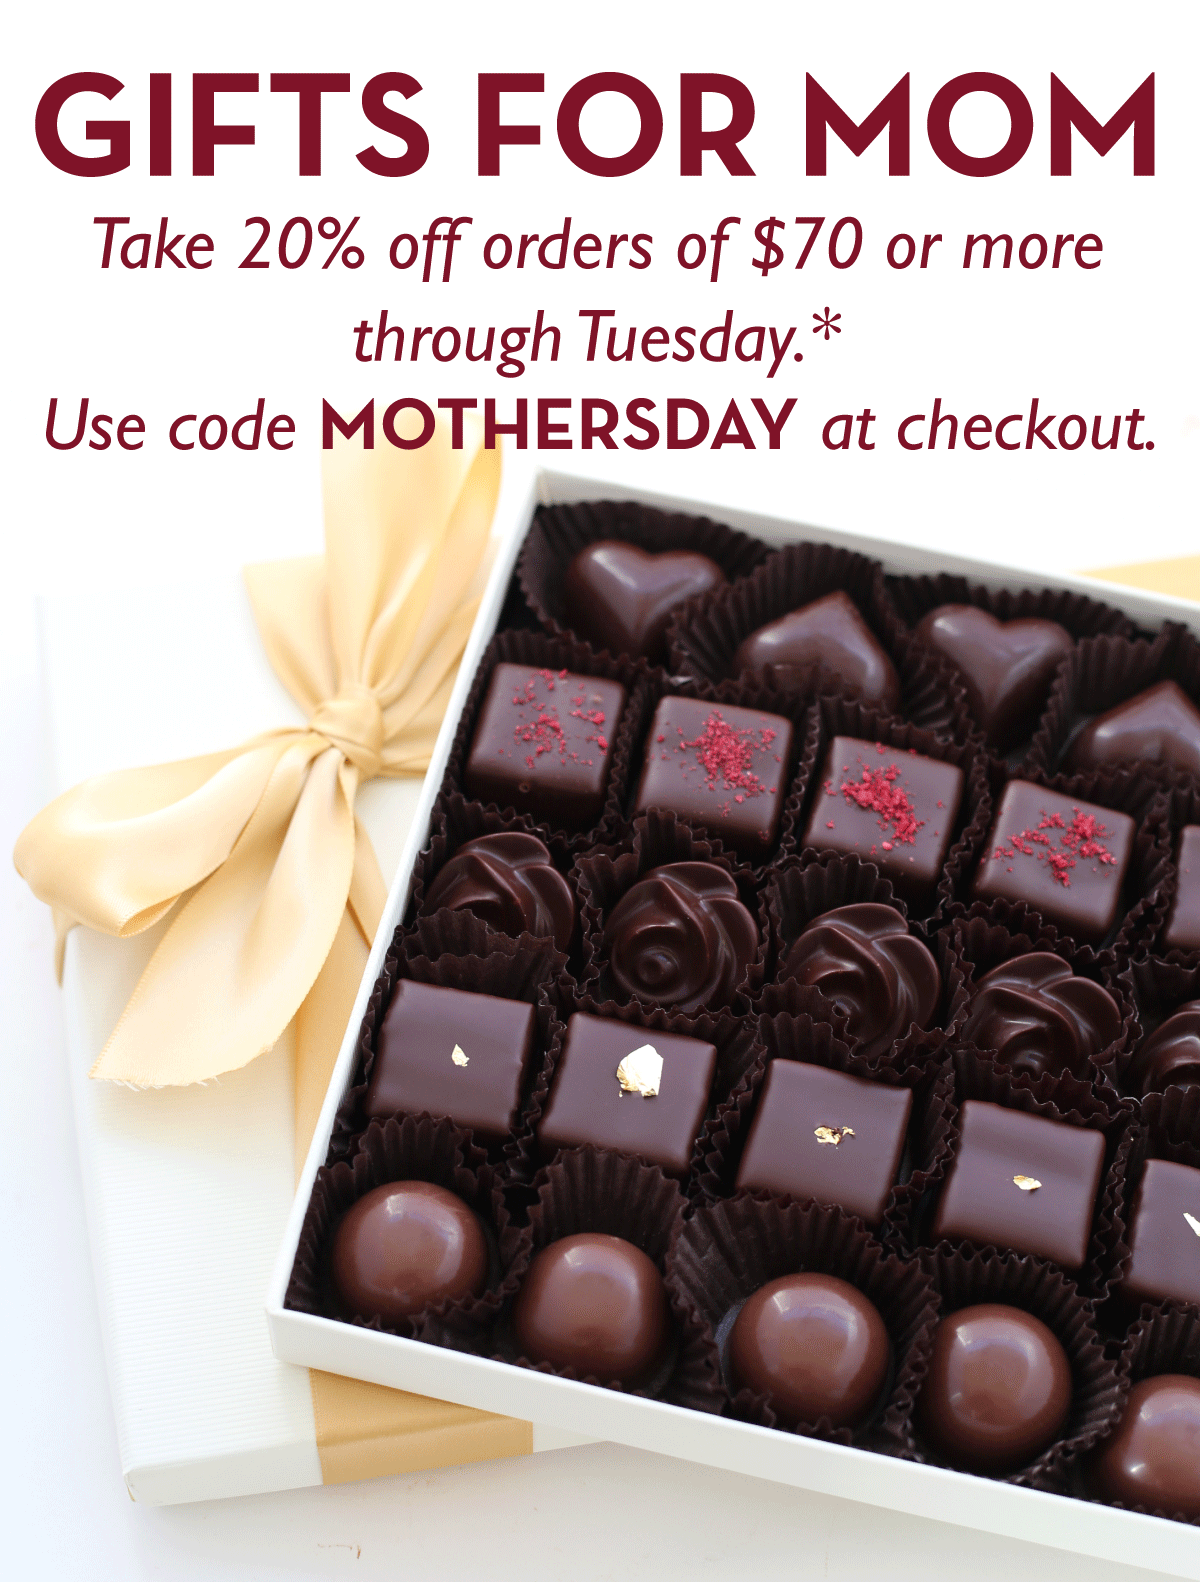 Take 20% off orders of $70 or more through Tuesday.* Use code MOTHERSDAY at checkout.